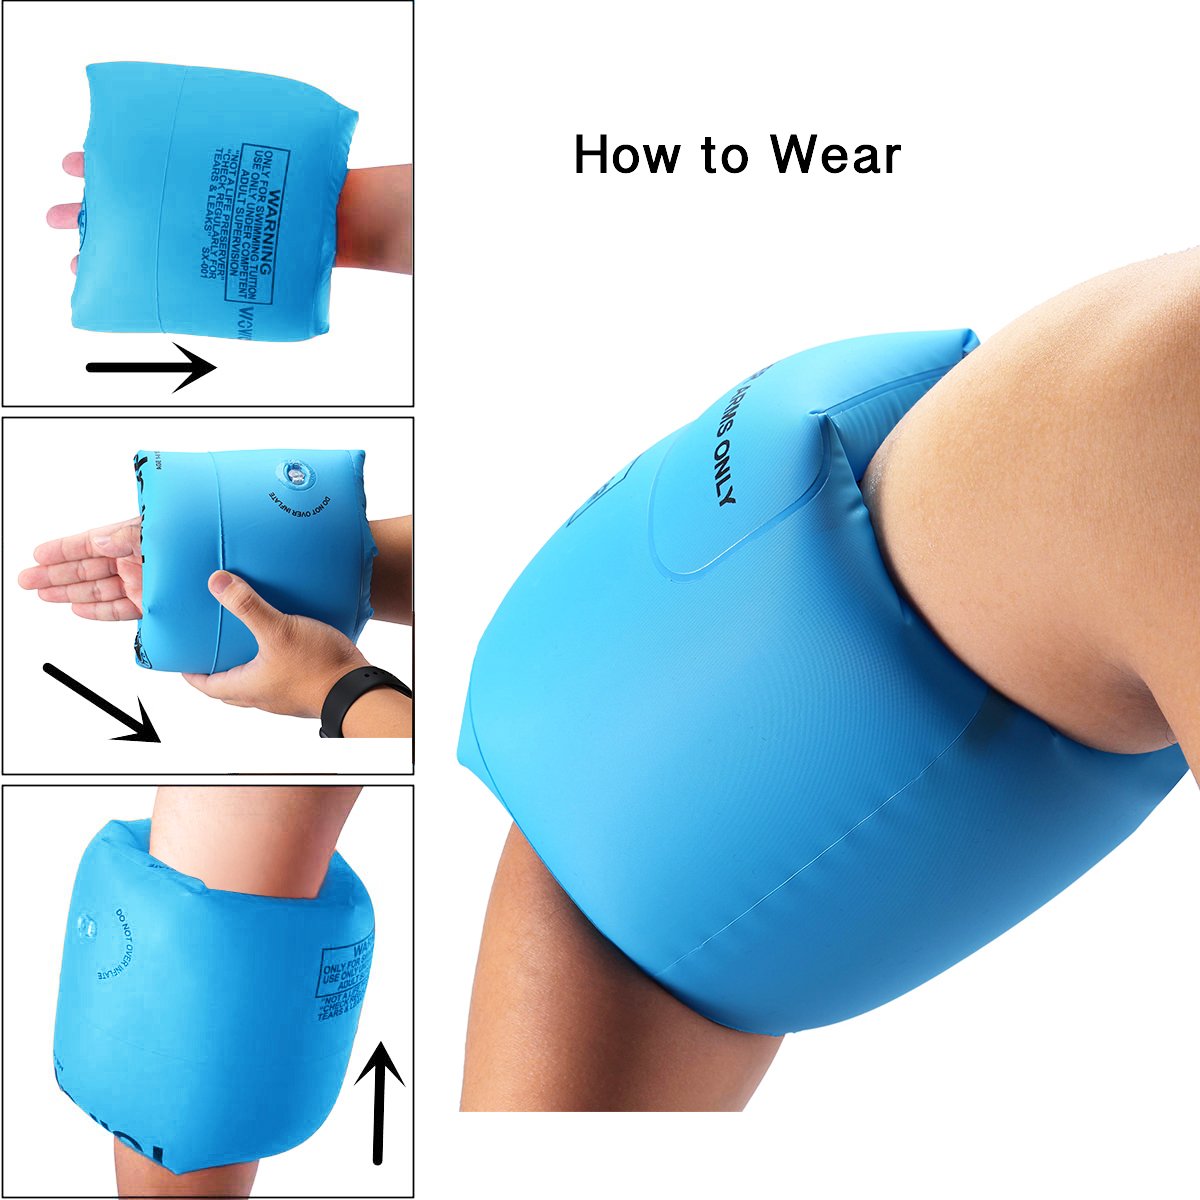 Wowelife Arm Floaties Inflatable Swim Arm Bands Floater Sleeves Swimming Rings Tube Armlets for Kids Toddlers and Adults Blue